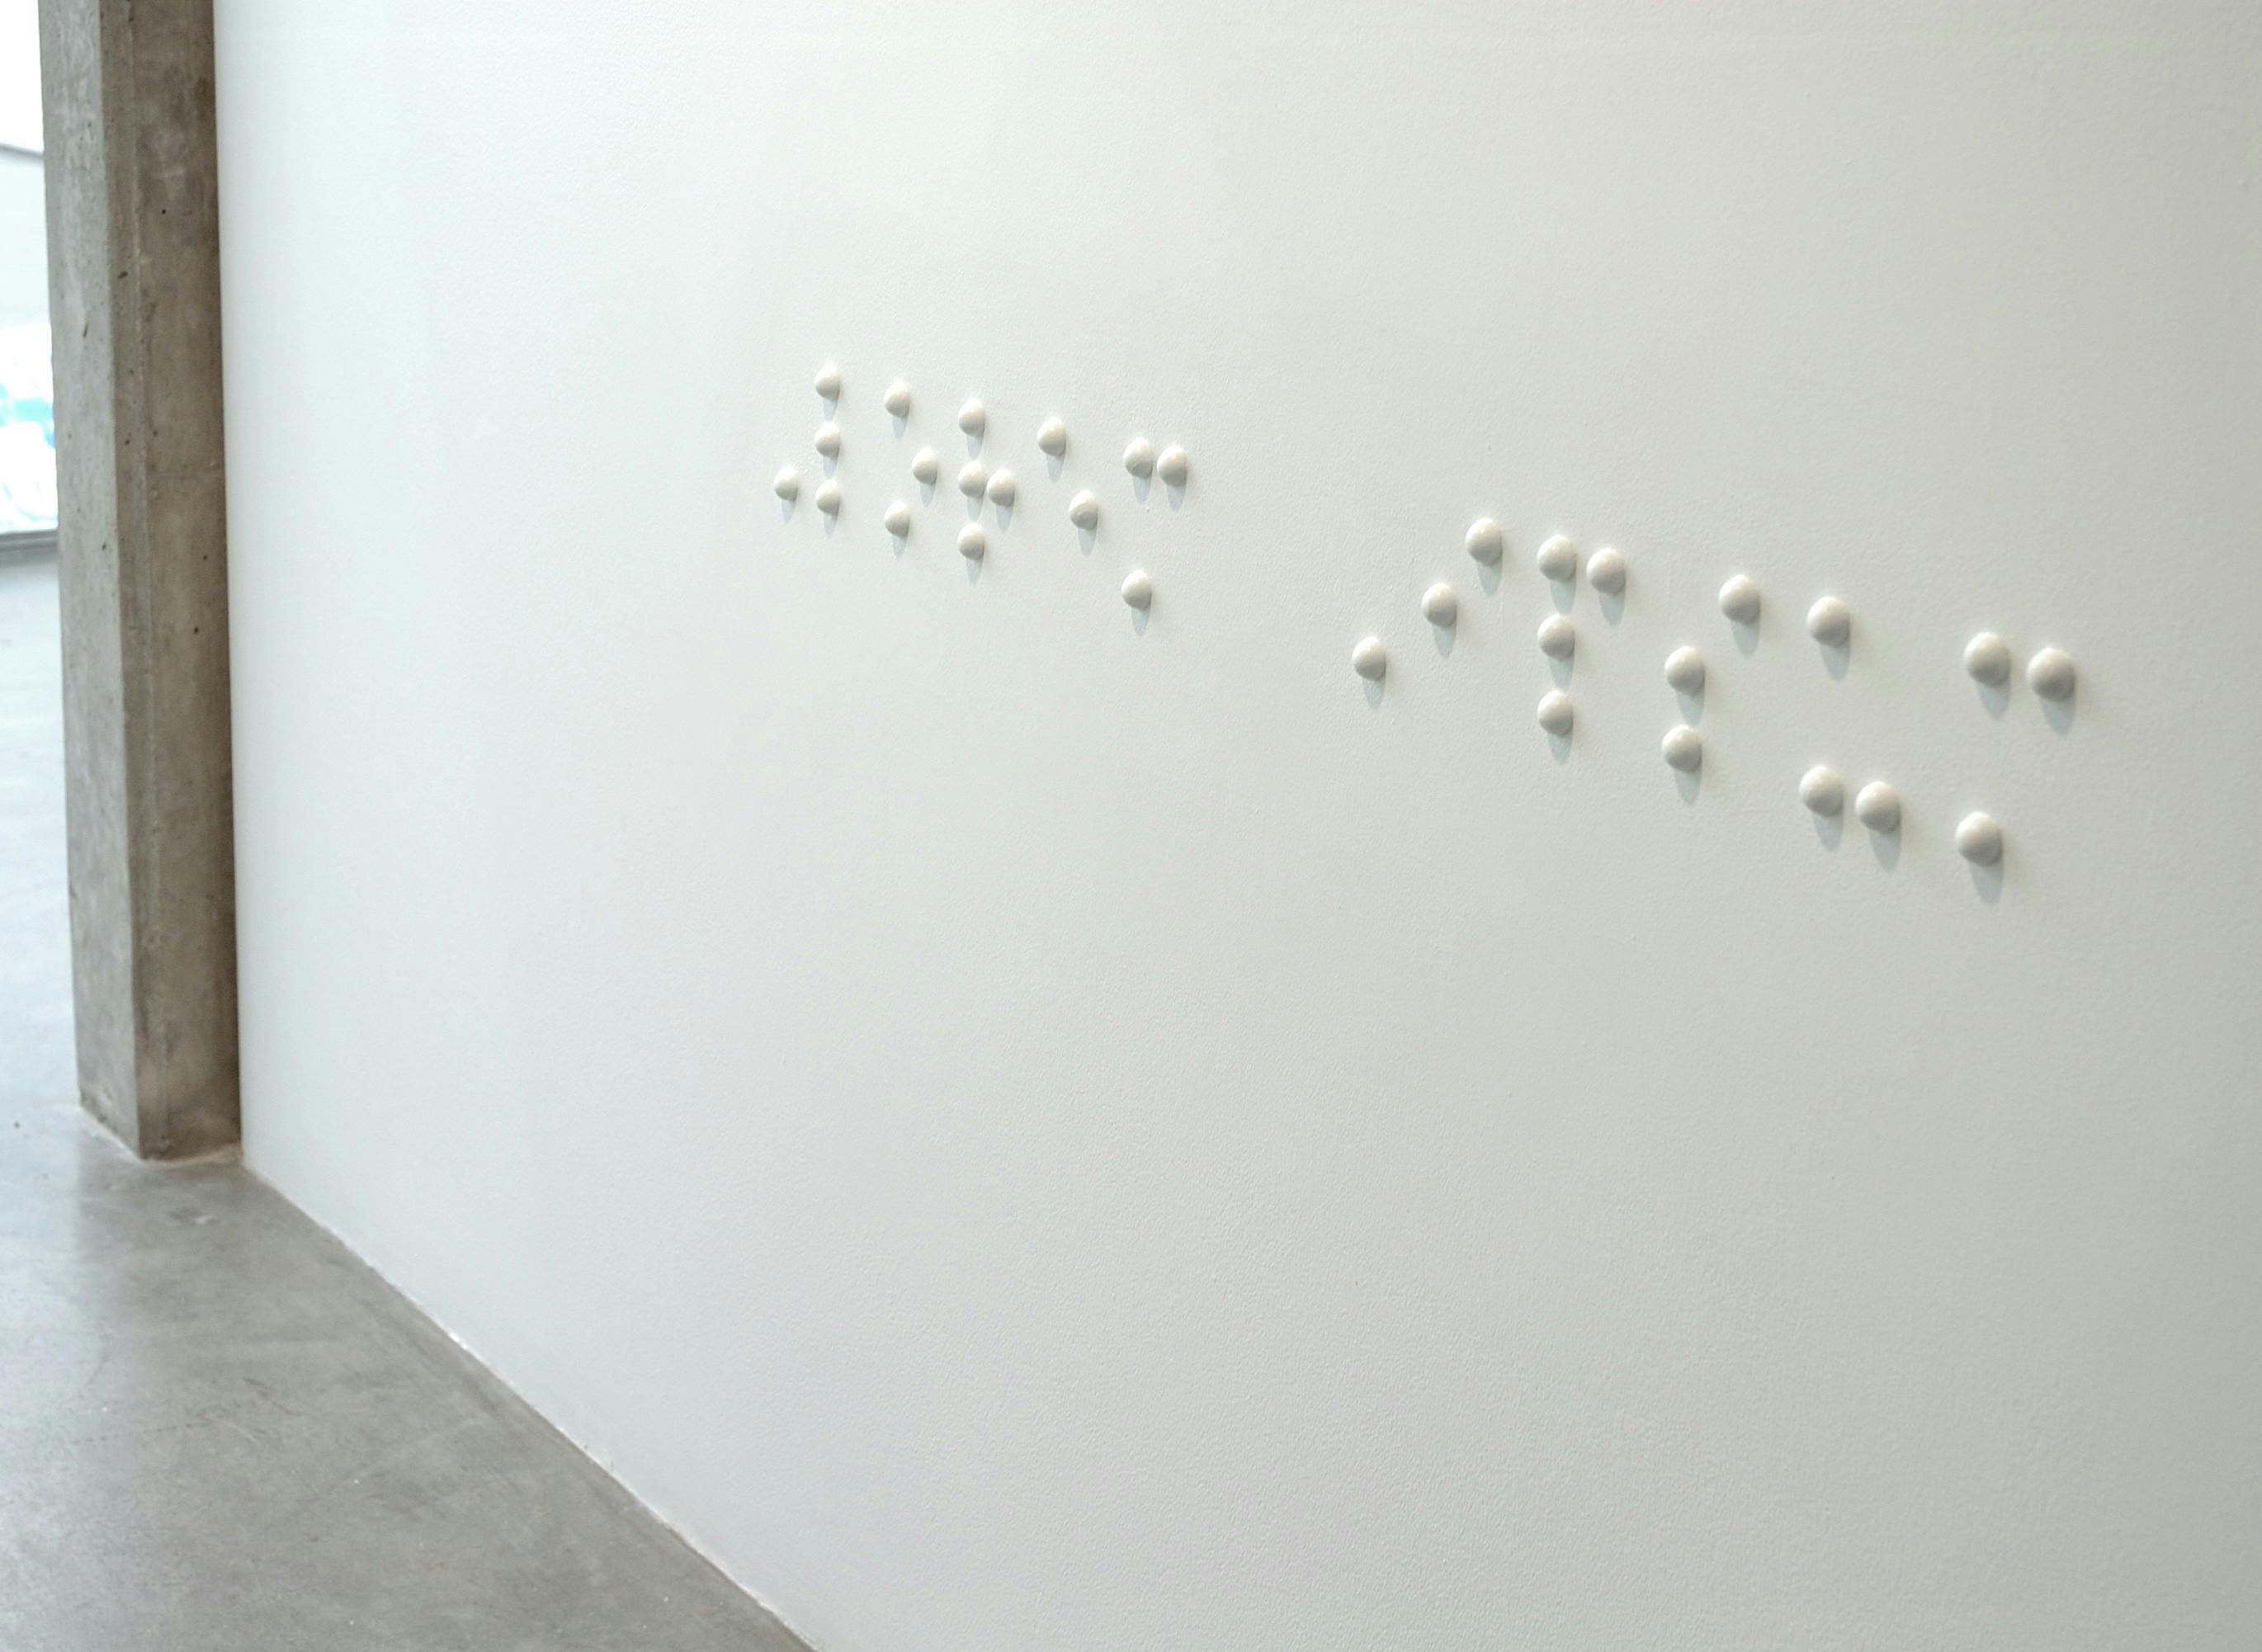 Large-sized braille is installed on a white wall between CAG’s lobby to one of its gallery spaces. The braille is placed around the height where adults’ hands will be when they stand.